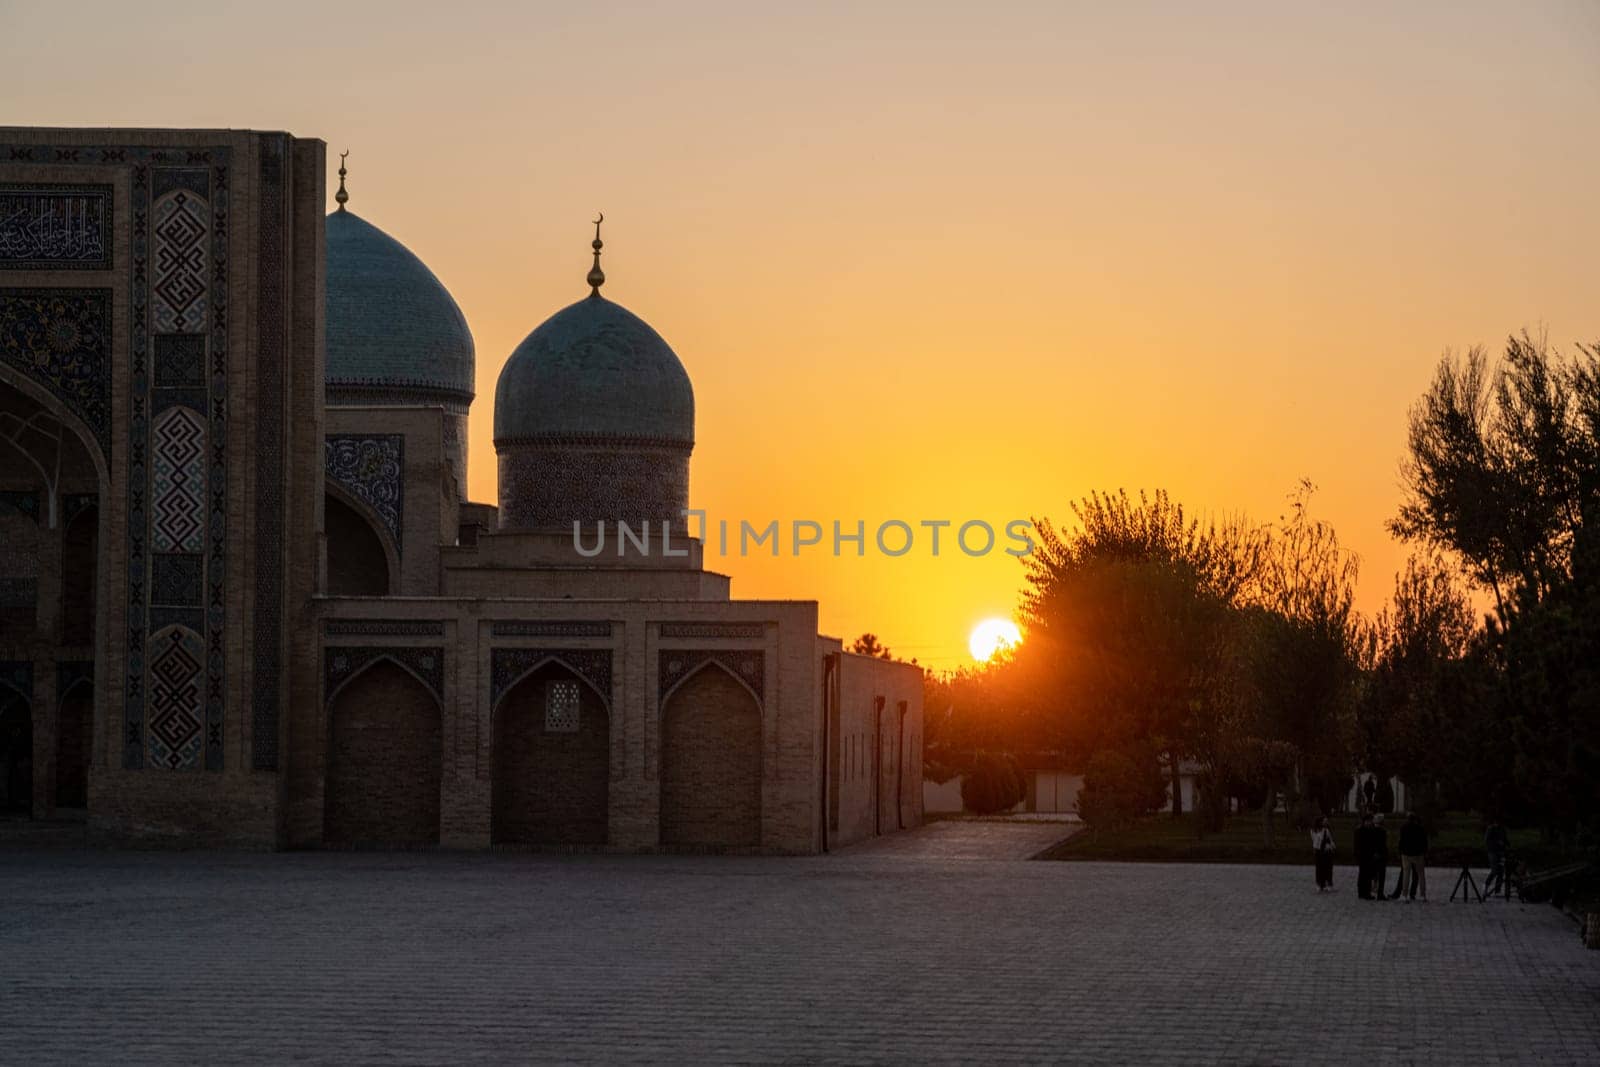 The ancient architecture of Central Asia, Samarkand at sunset, Republic of Uzbekistan by A_Karim